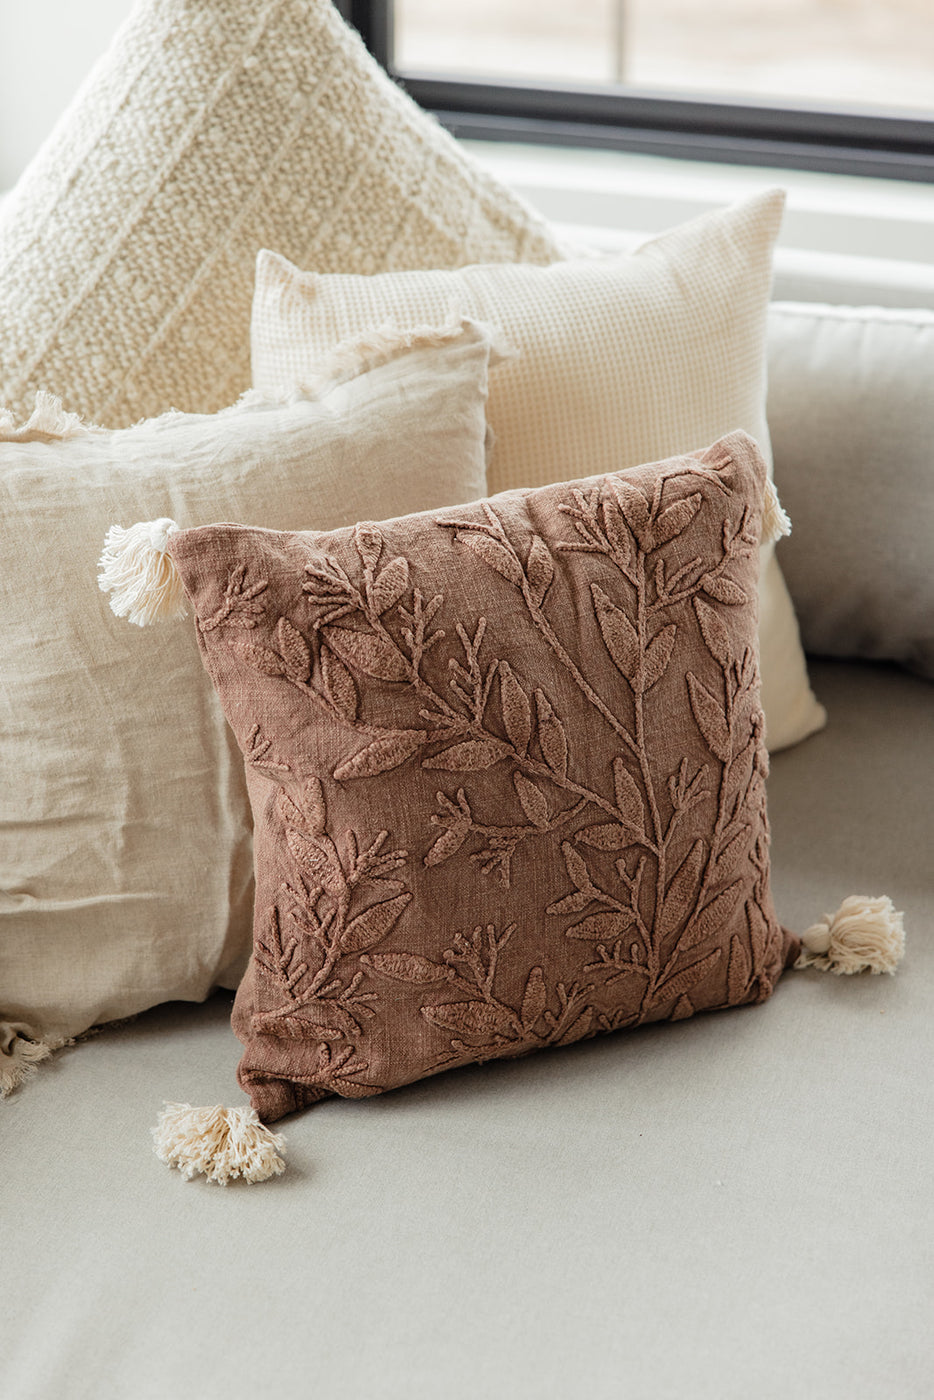 a brown pillow with tassels on it